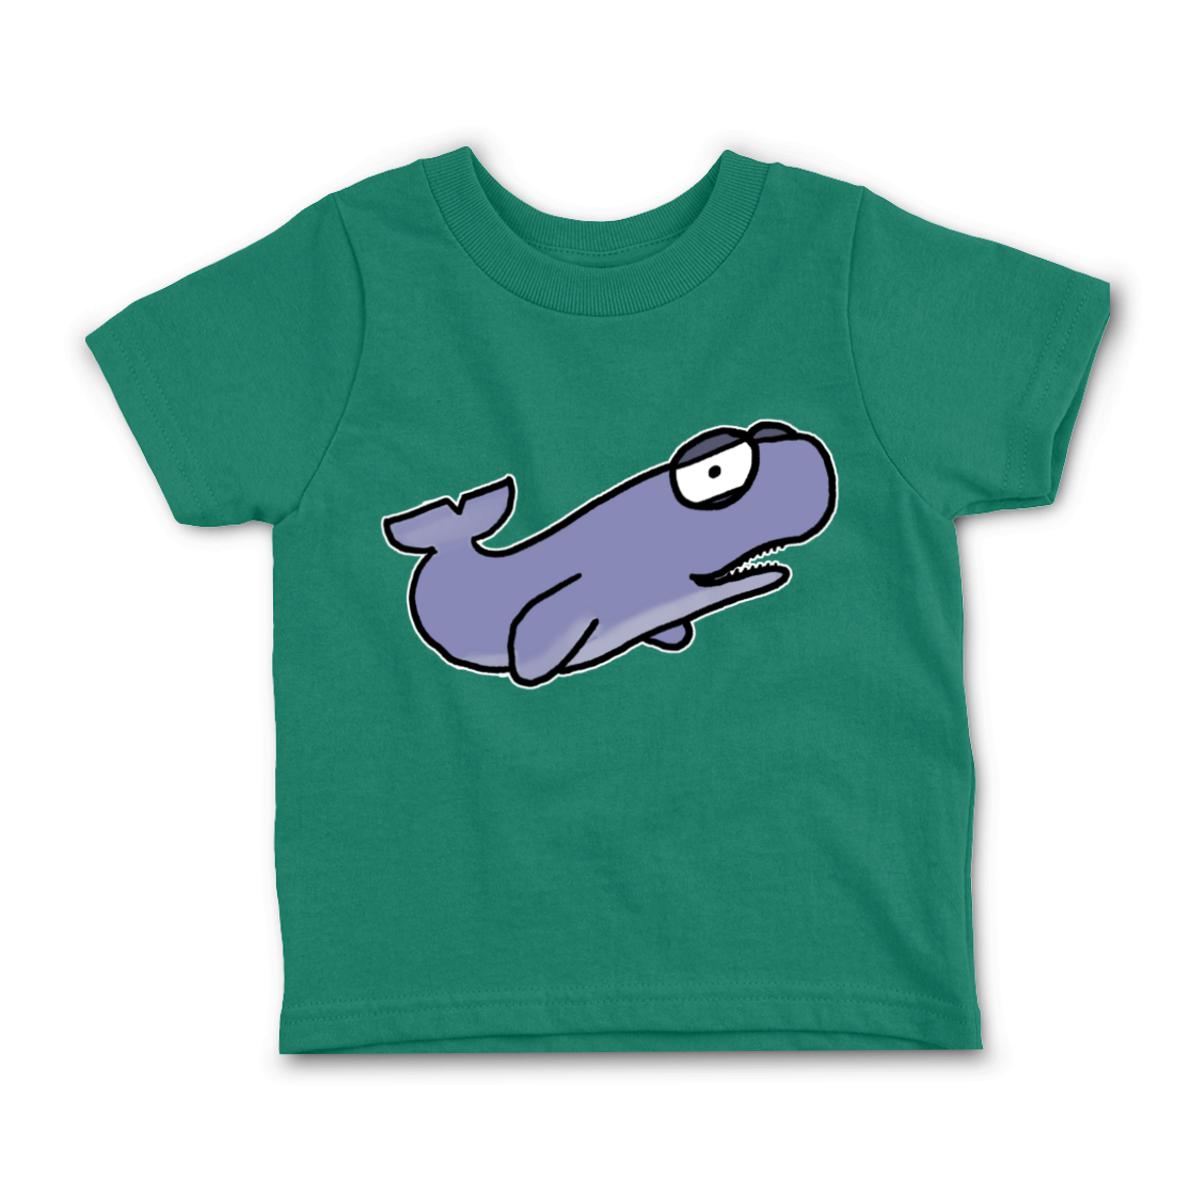 Sperm Whale Toddler Tee 2T kelly